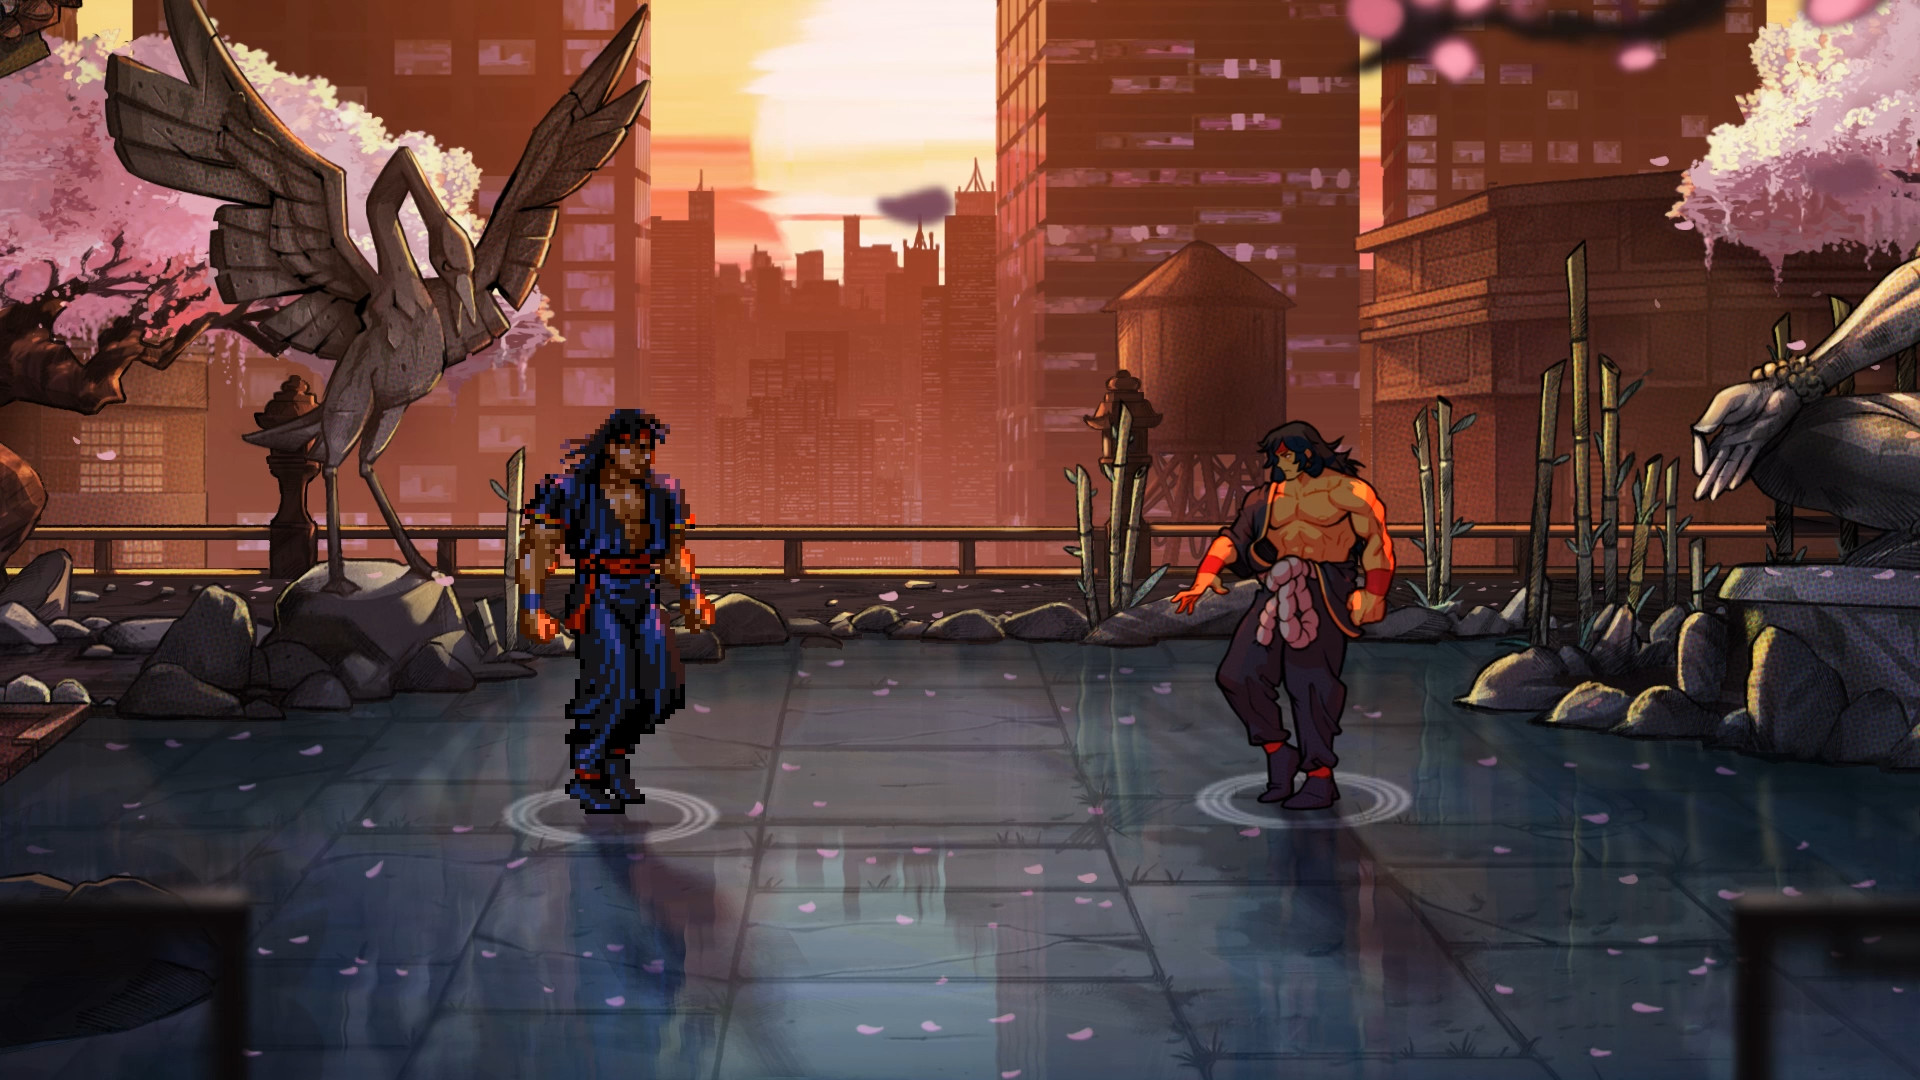 Streets of Rage 4 Free Download